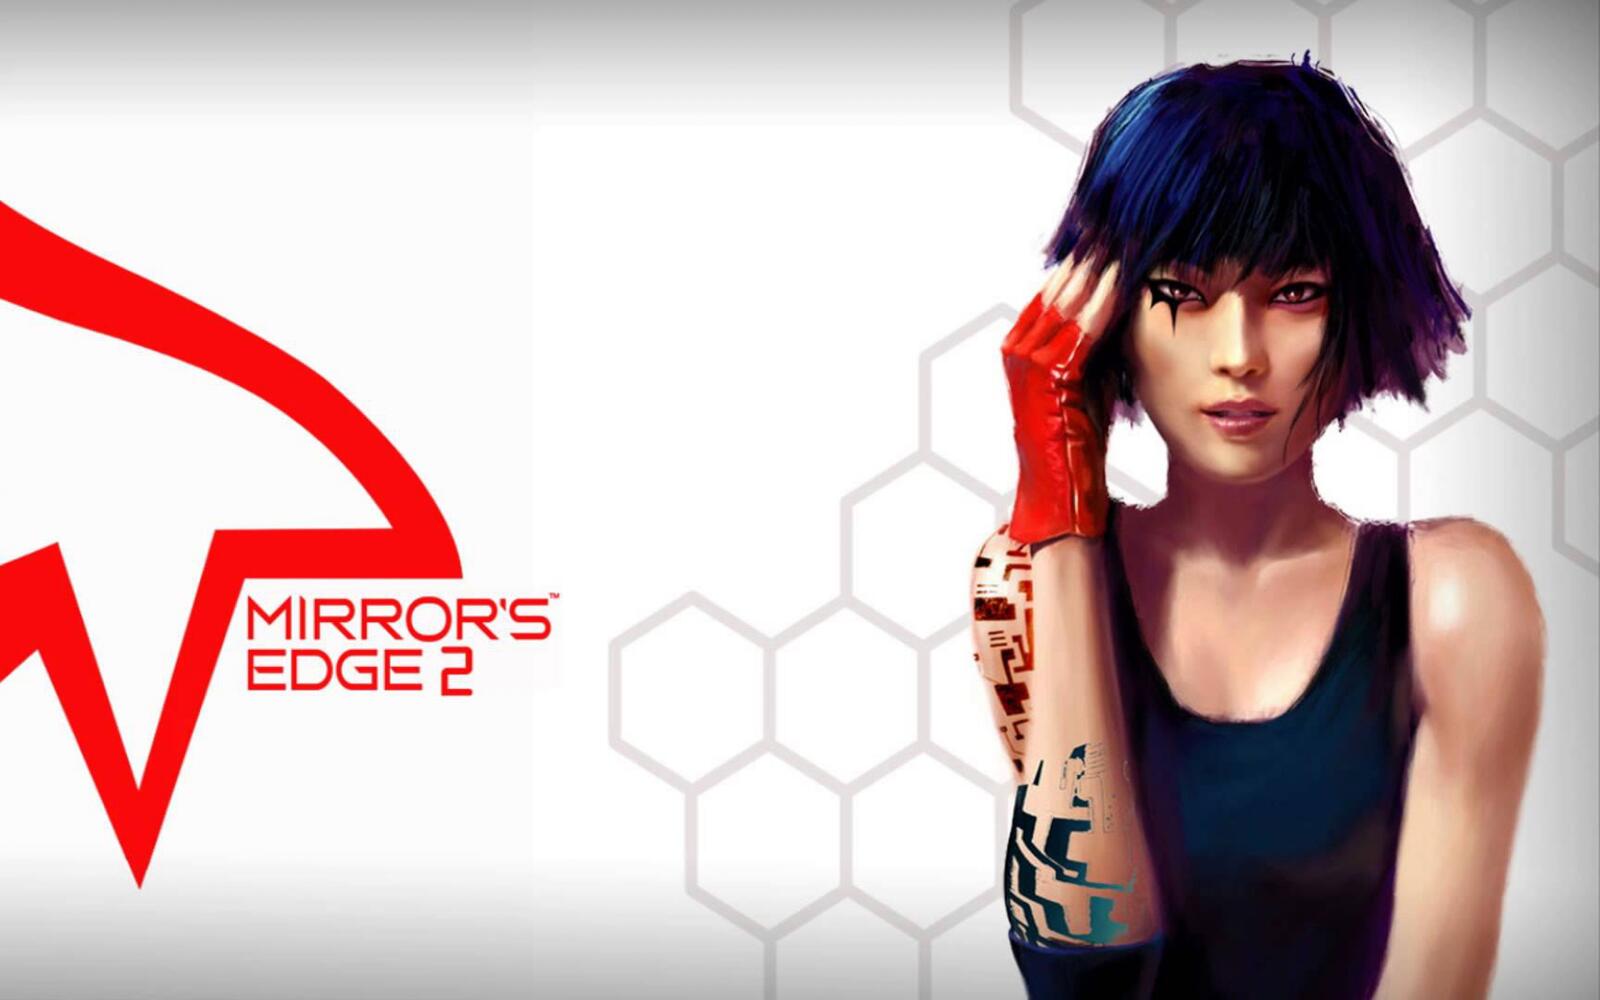 Wallpapers mirrors edge games Ea Games on the desktop